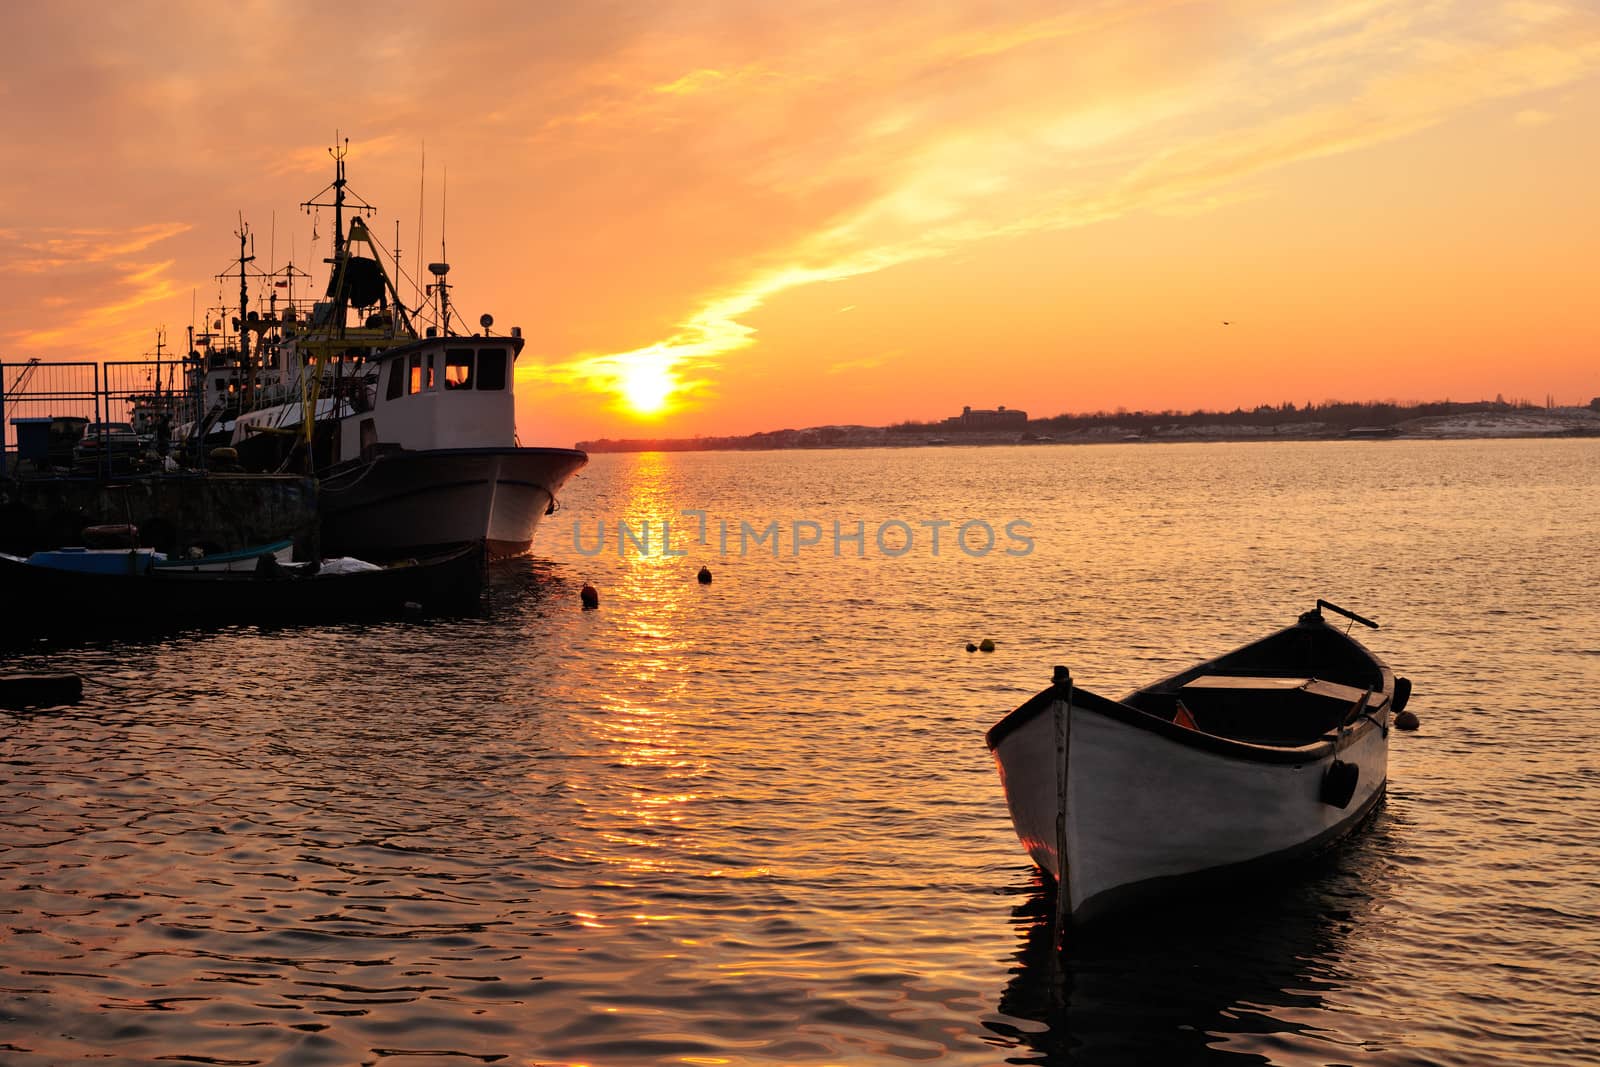 Sunset with boats over Nessebar bay, Black Sea, Bulgaria